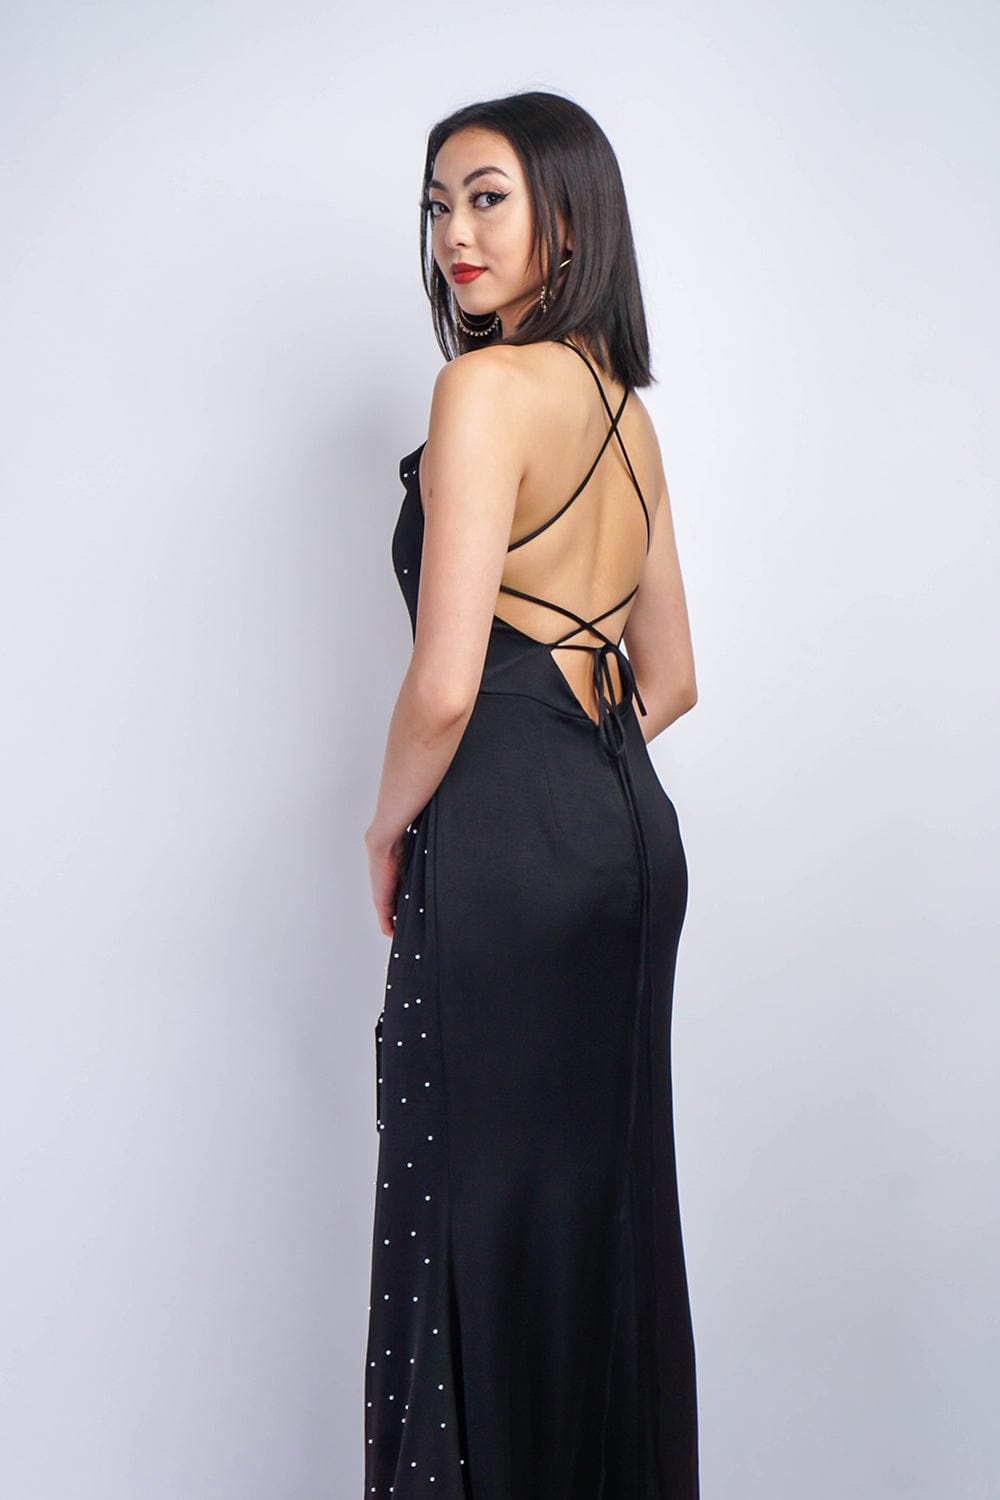 GOWNS Black Pearl Cowl Gown - Chloe Dao